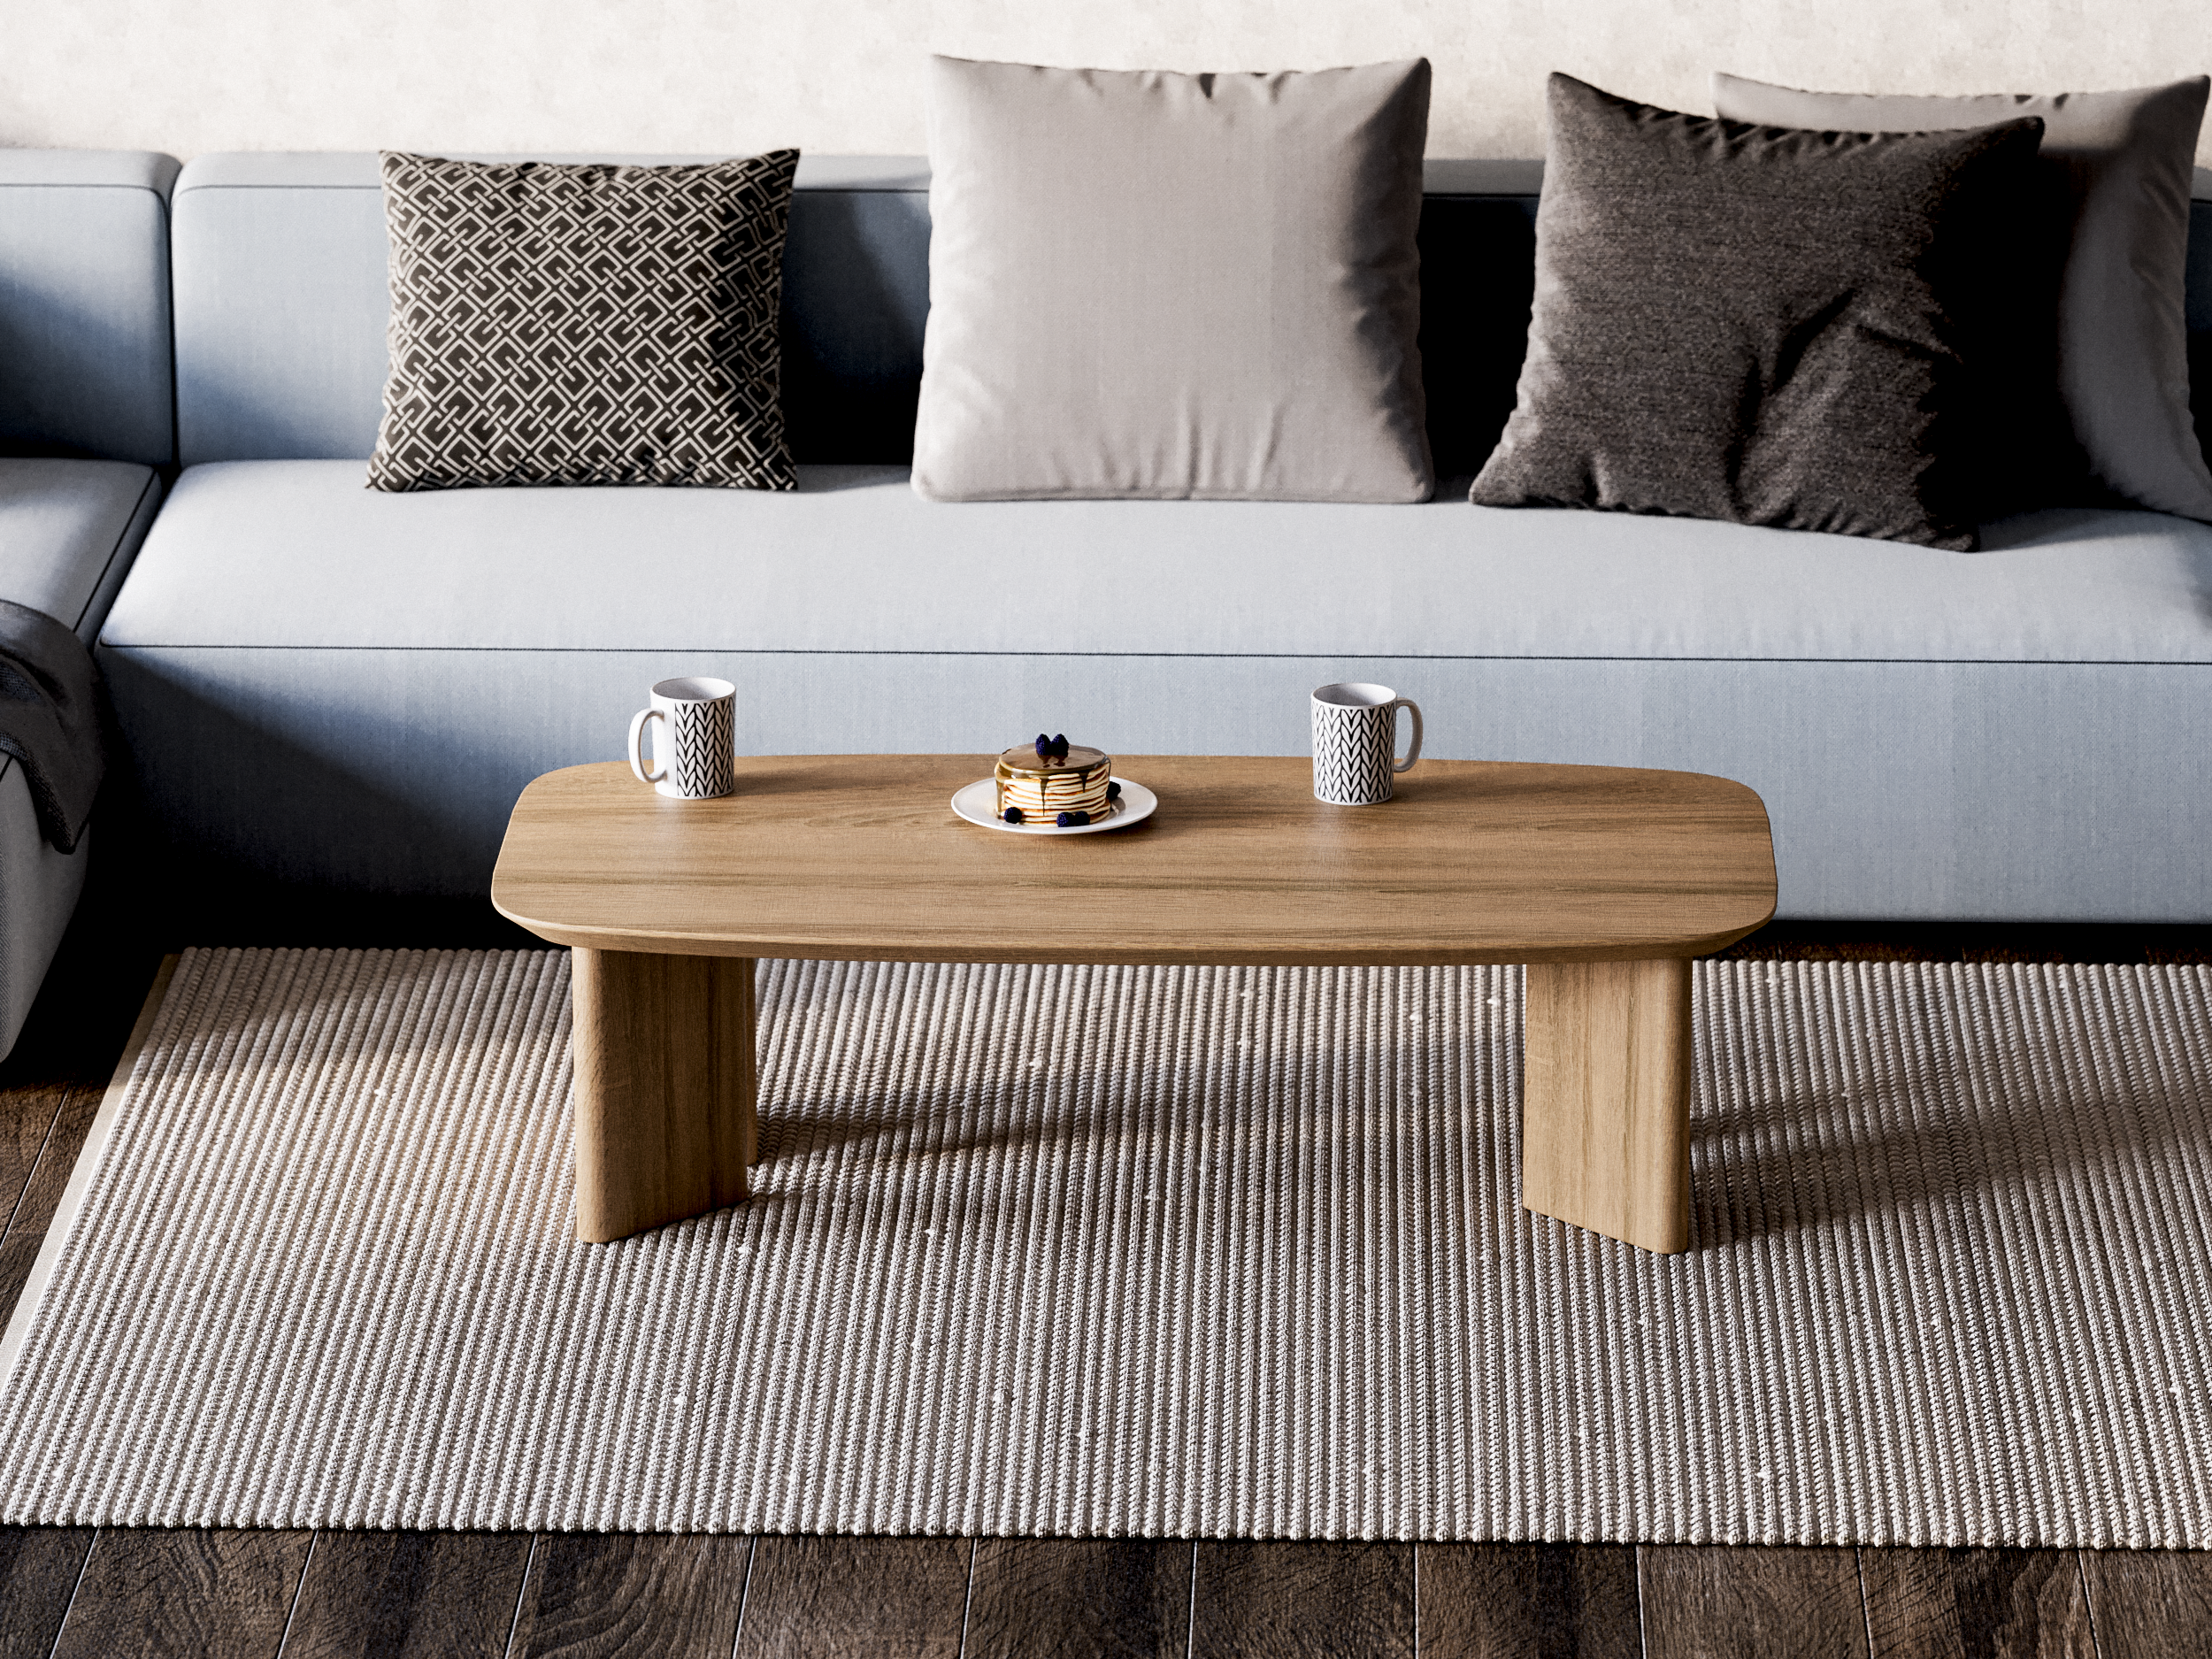 THE CAYDEN - COFFEE TABLE